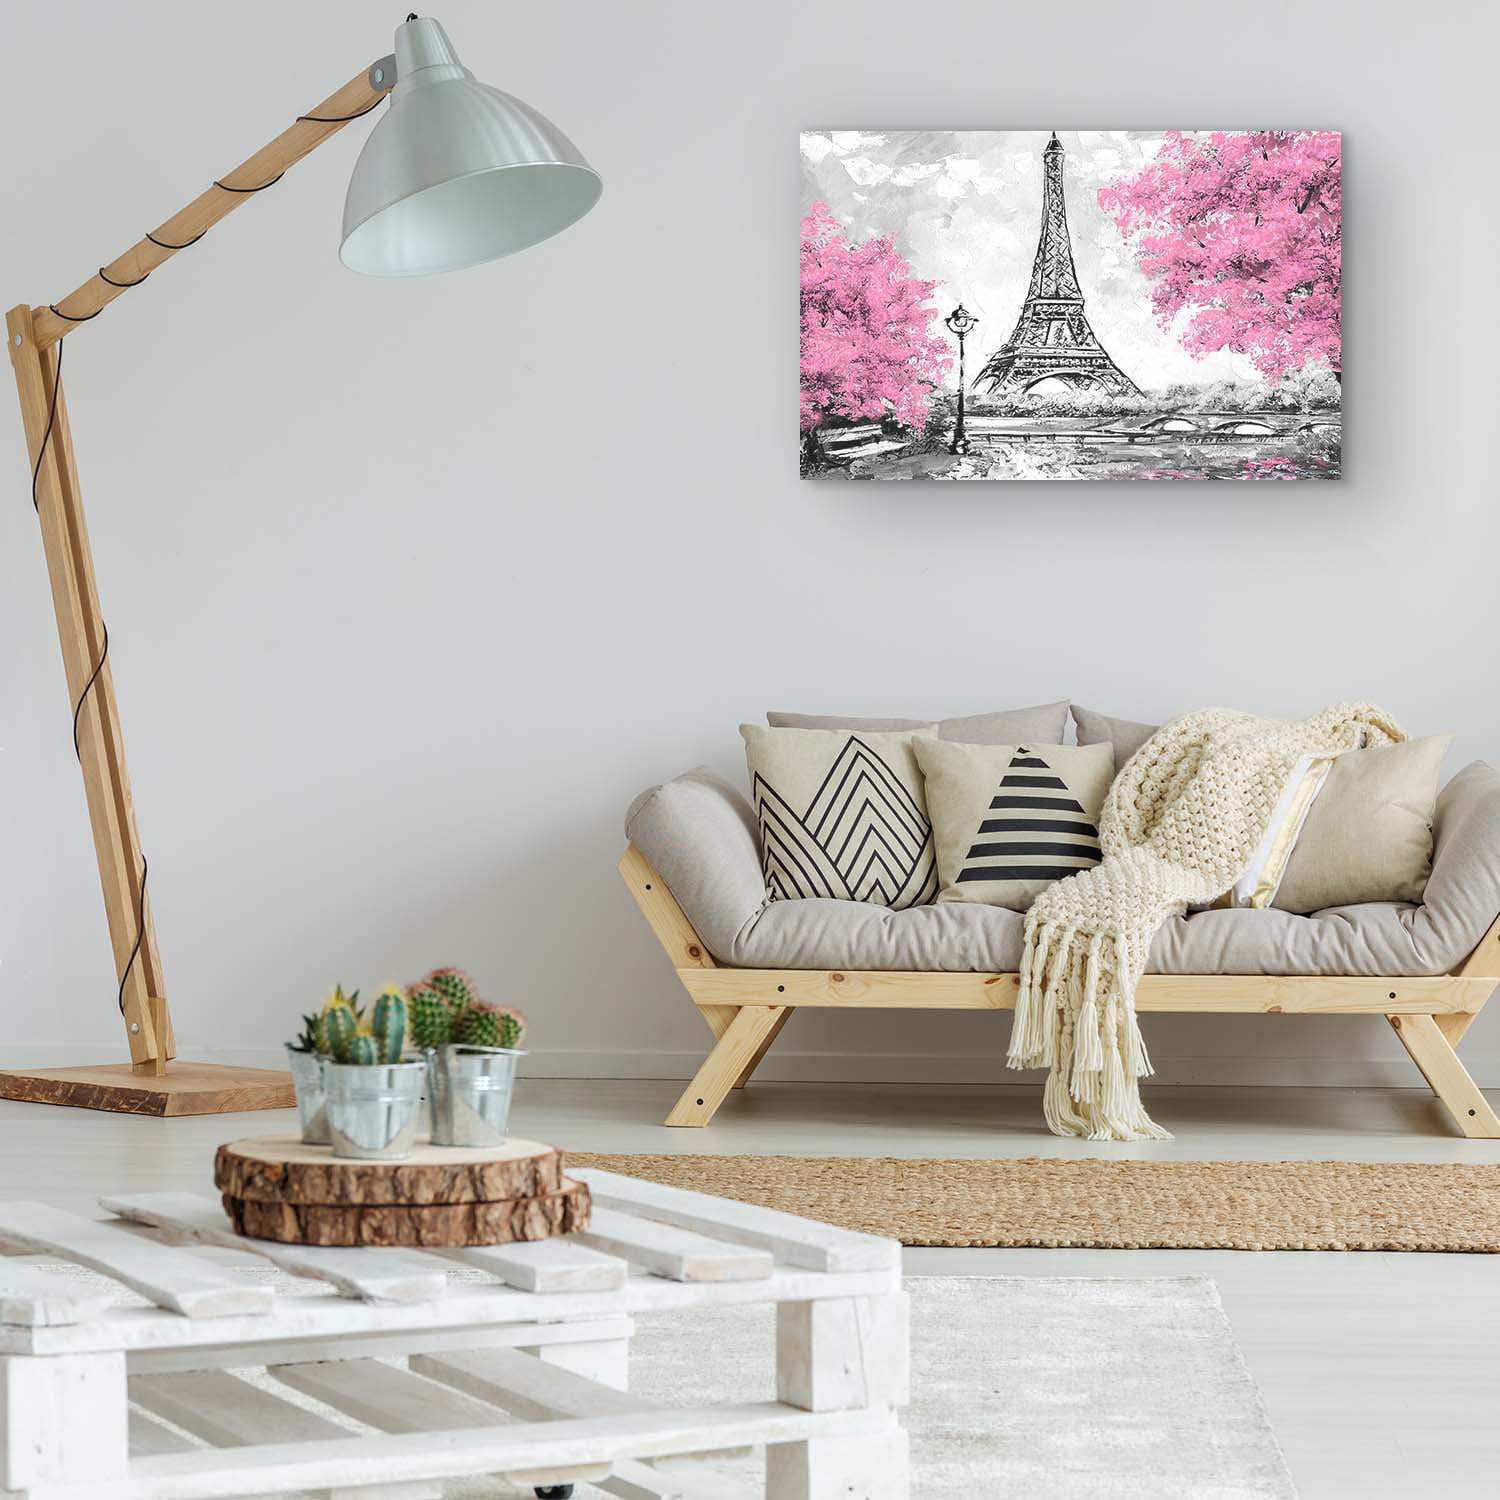 Details about   EIFFEL TOWER PARIS WITH PINK TREES PHOTO  PRINT ON WOOD  FRAMED CANVAS WALL ART 